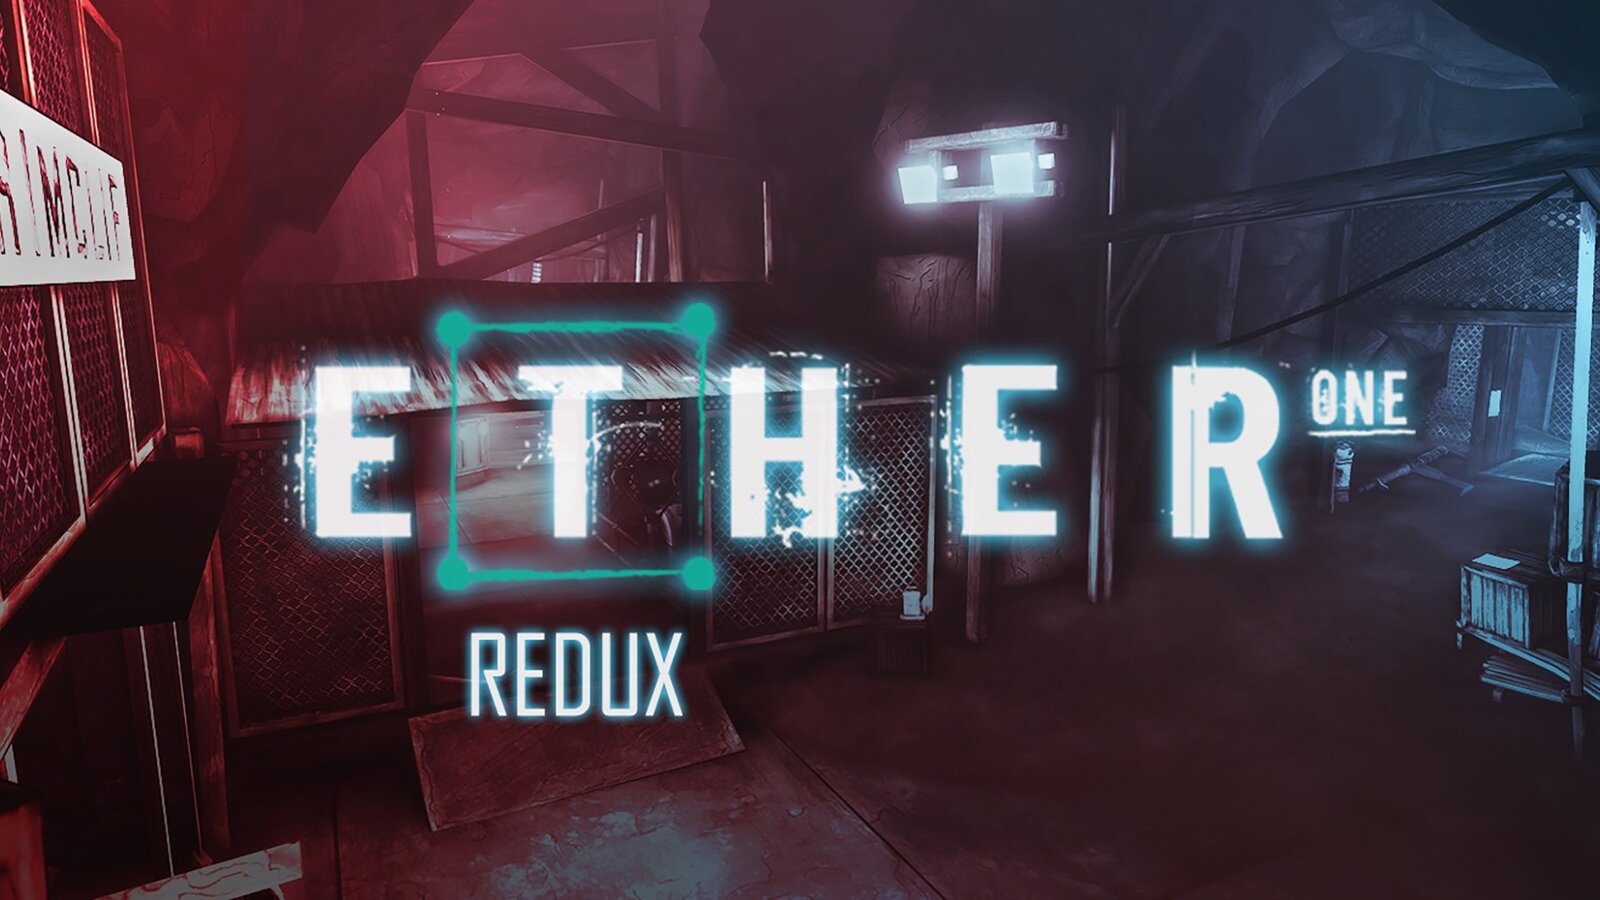 Ether One Redux